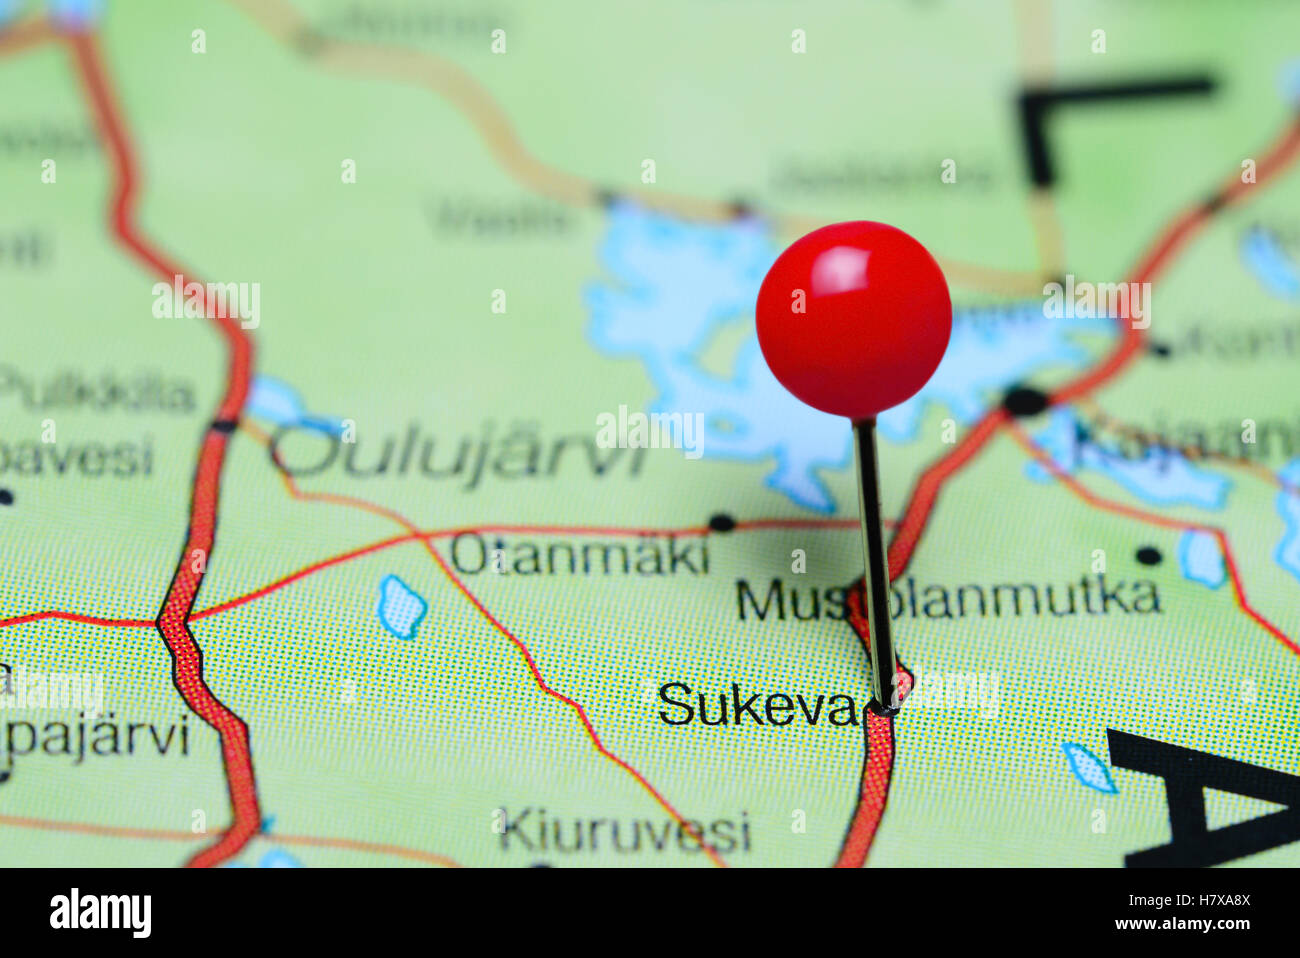 Sukeva pinned on a map of Finland Stock Photo